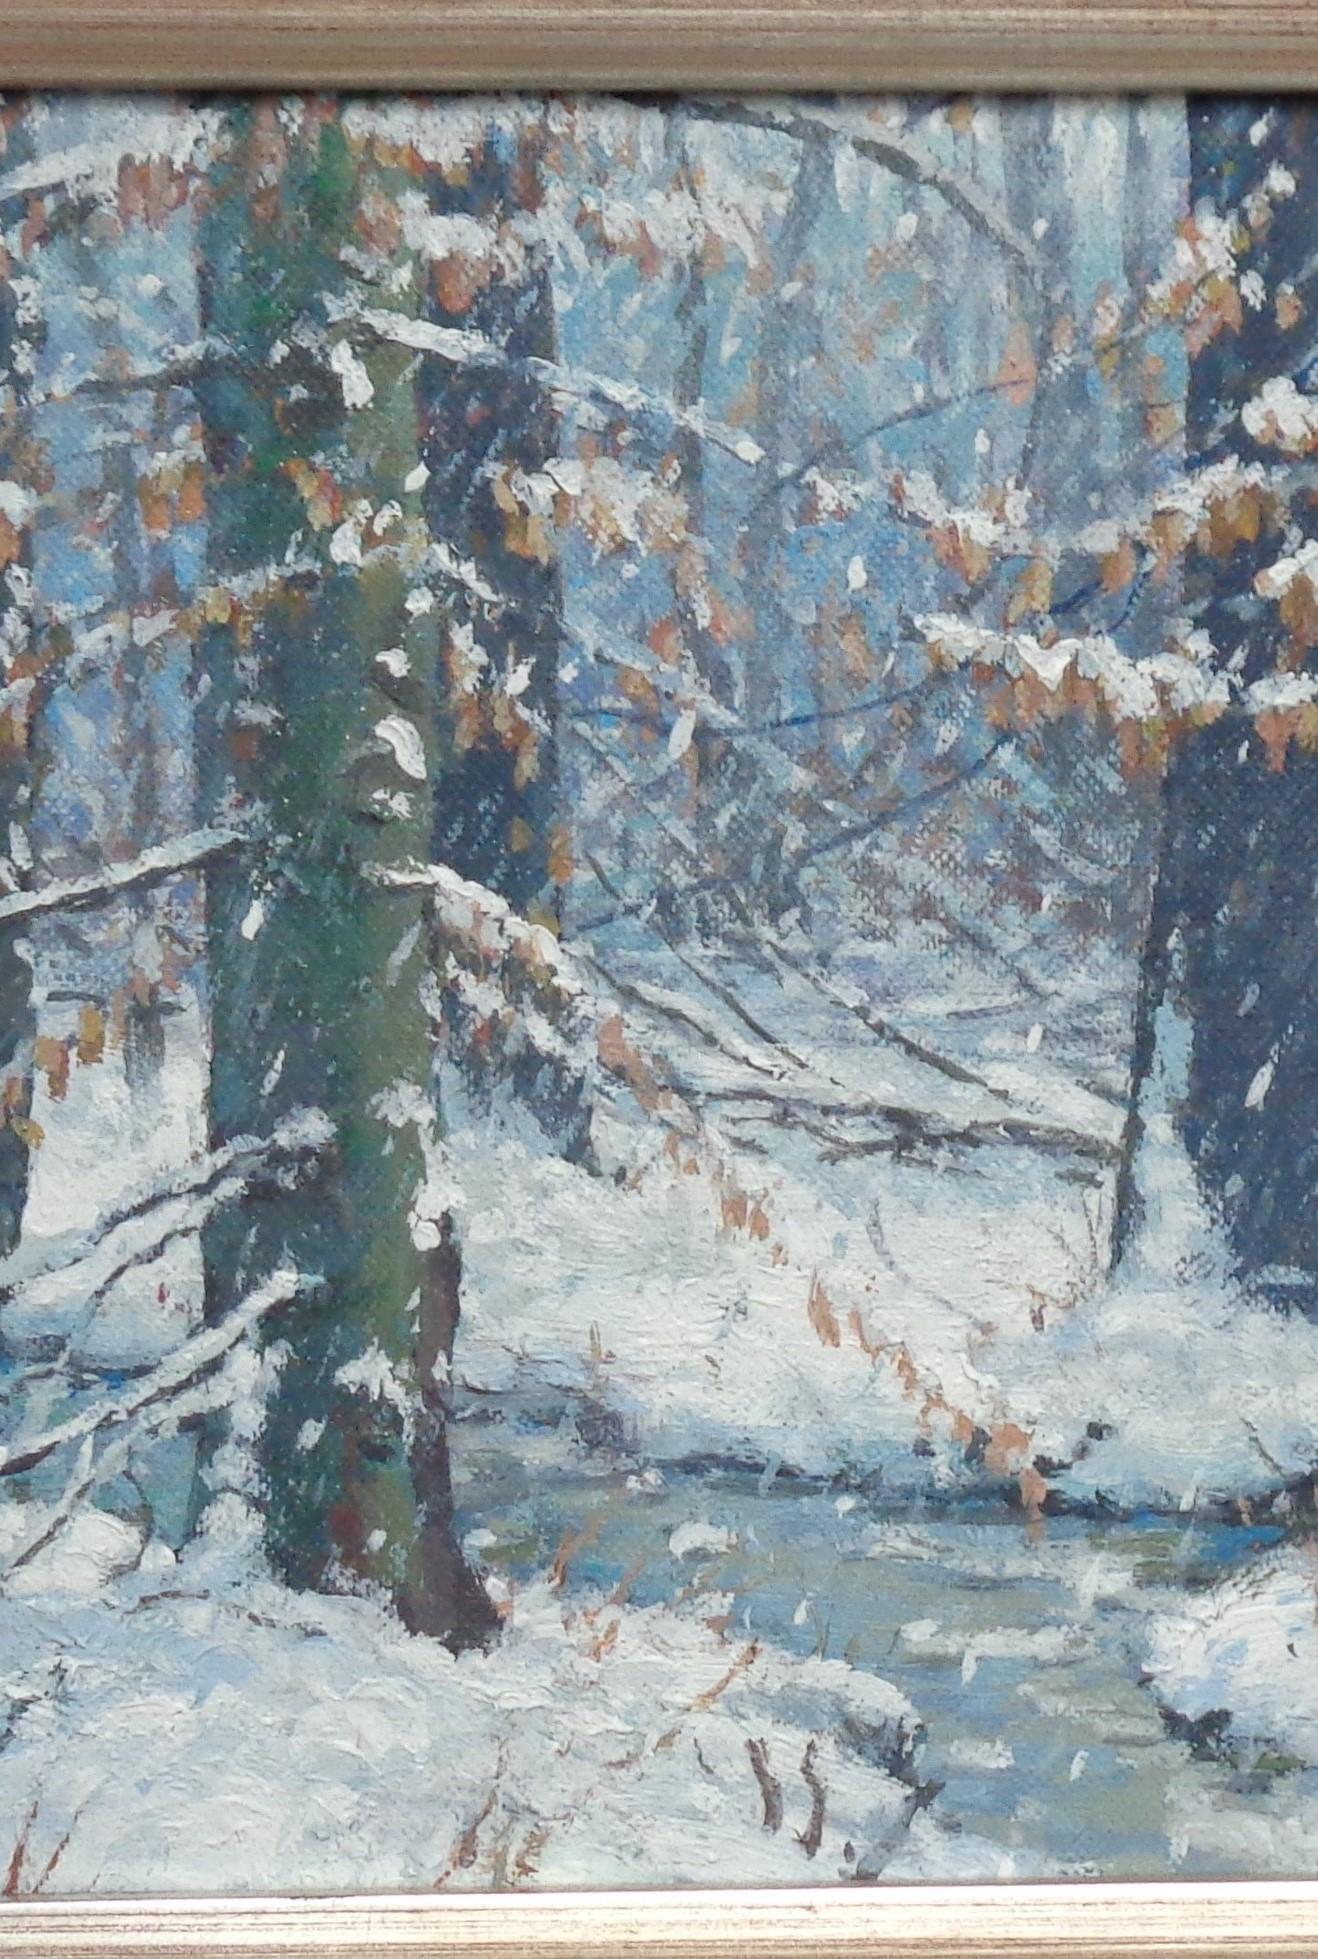  Contemporary Landscape Winter Snow Scene Oil Painting by Michael Budden For Sale 3